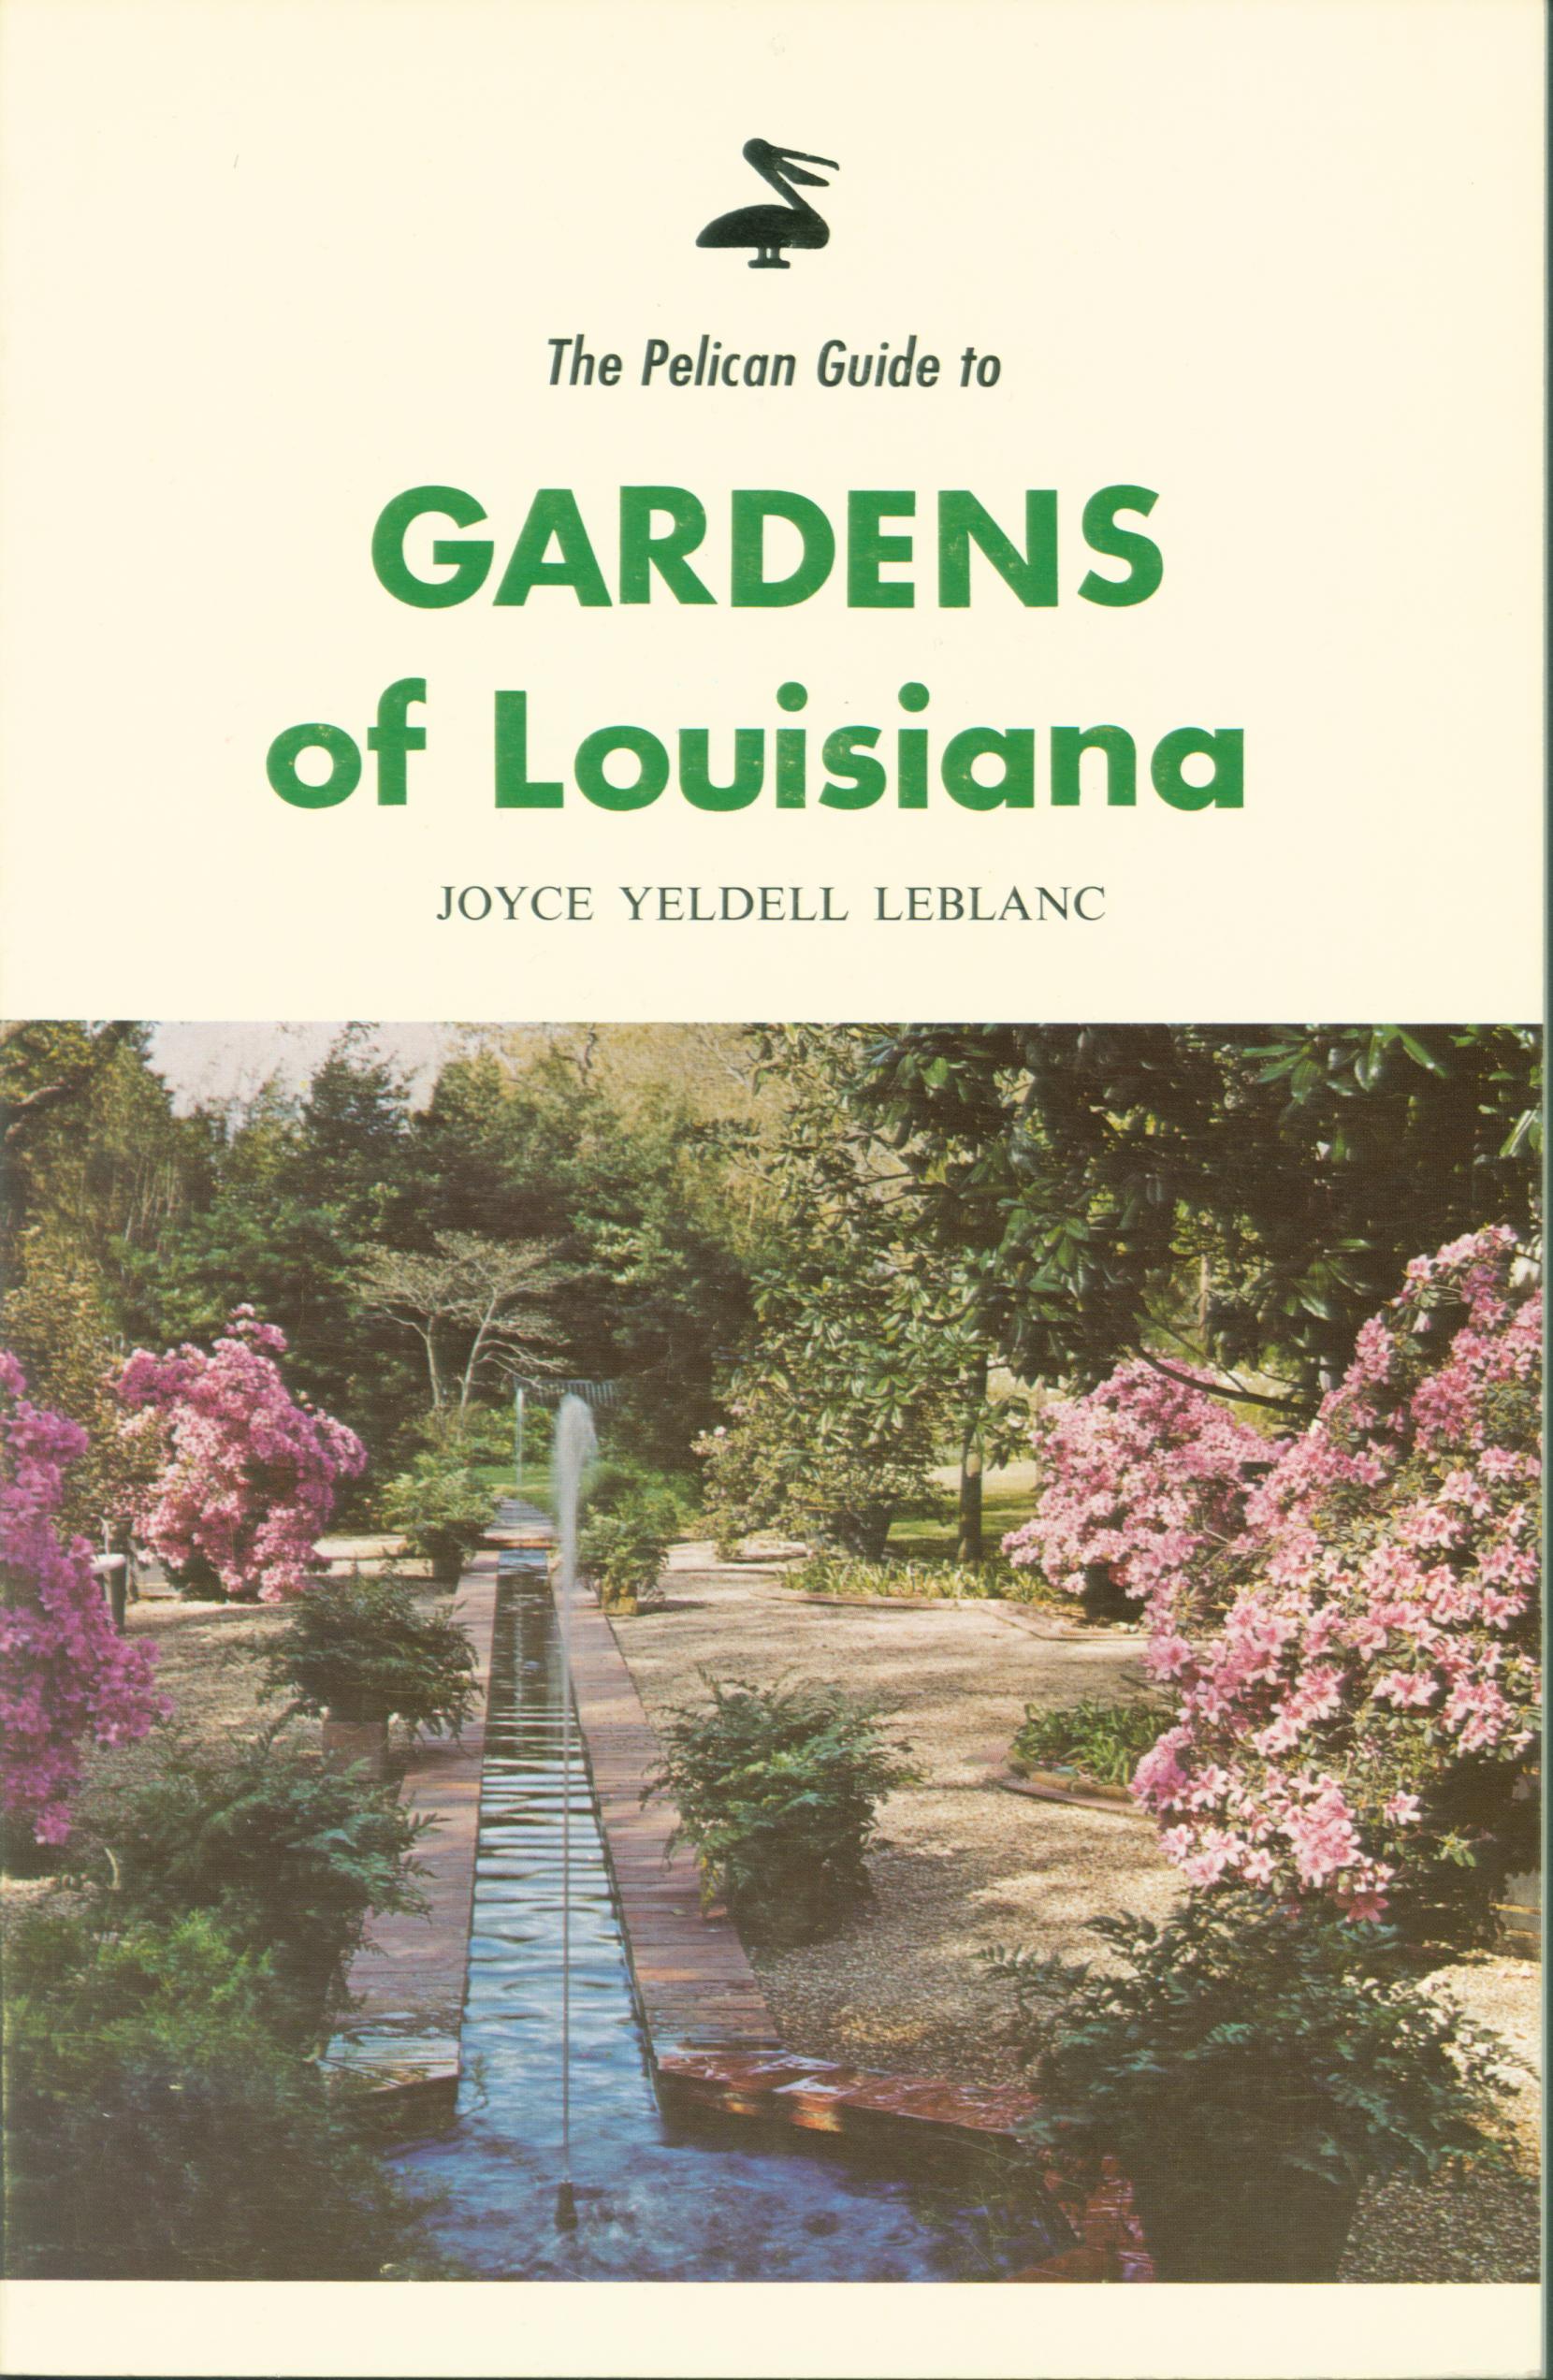 THE PELICAN GUIDE TO THE GARDENS OF LOUISIANA. 